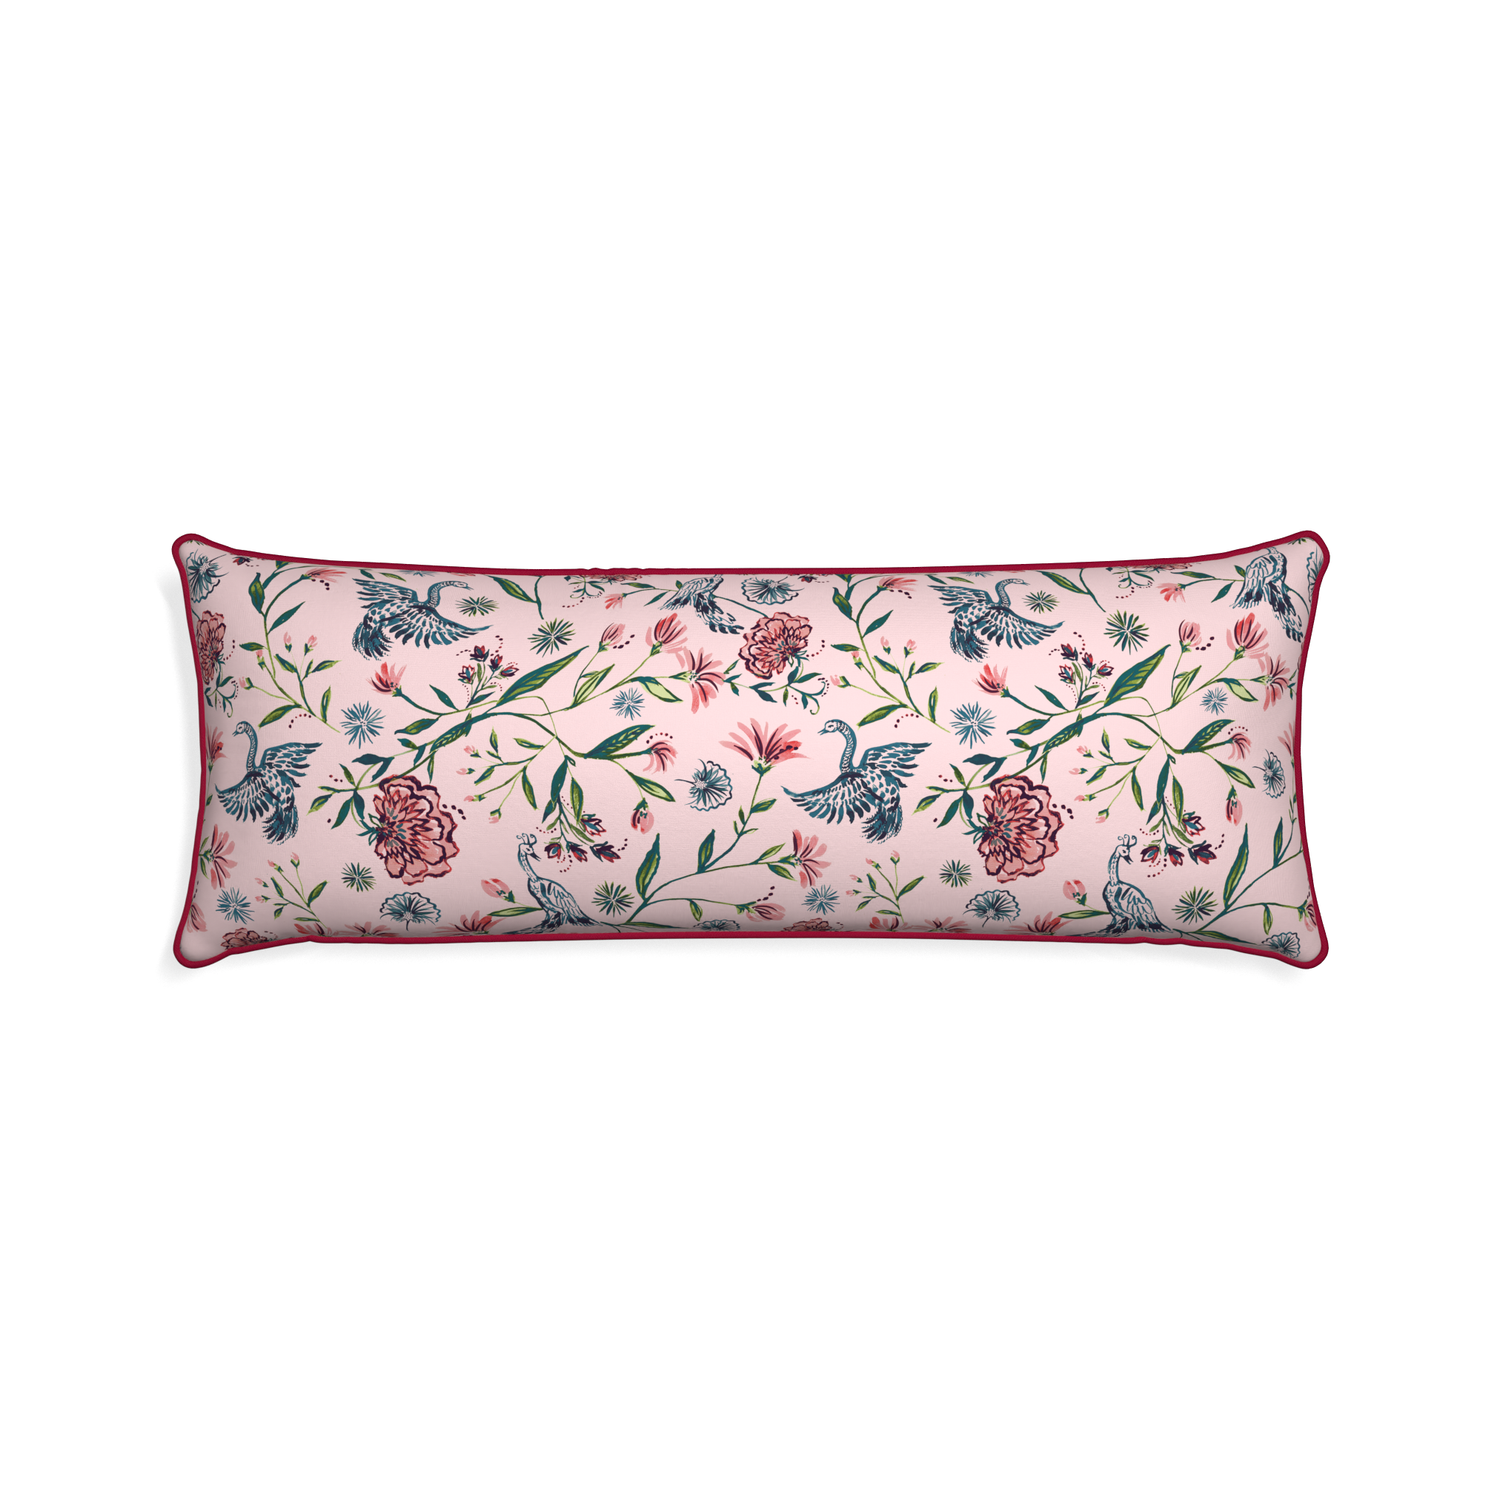 Xl-lumbar daphne rose custom pillow with raspberry piping on white background